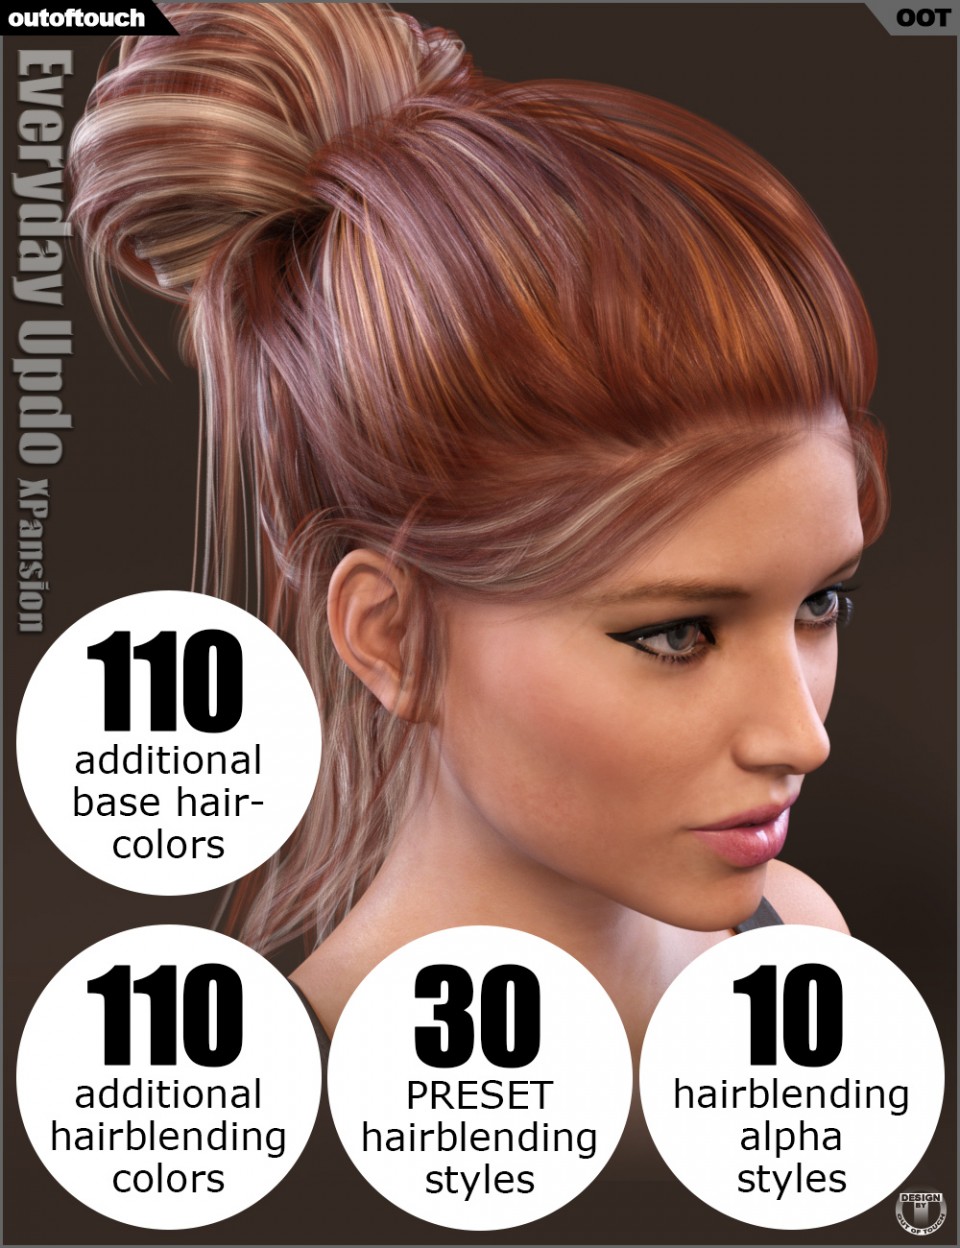 Everyday Updo Hair and OOT Hairblending 2.0 Texture XPansion_DAZ3DDL